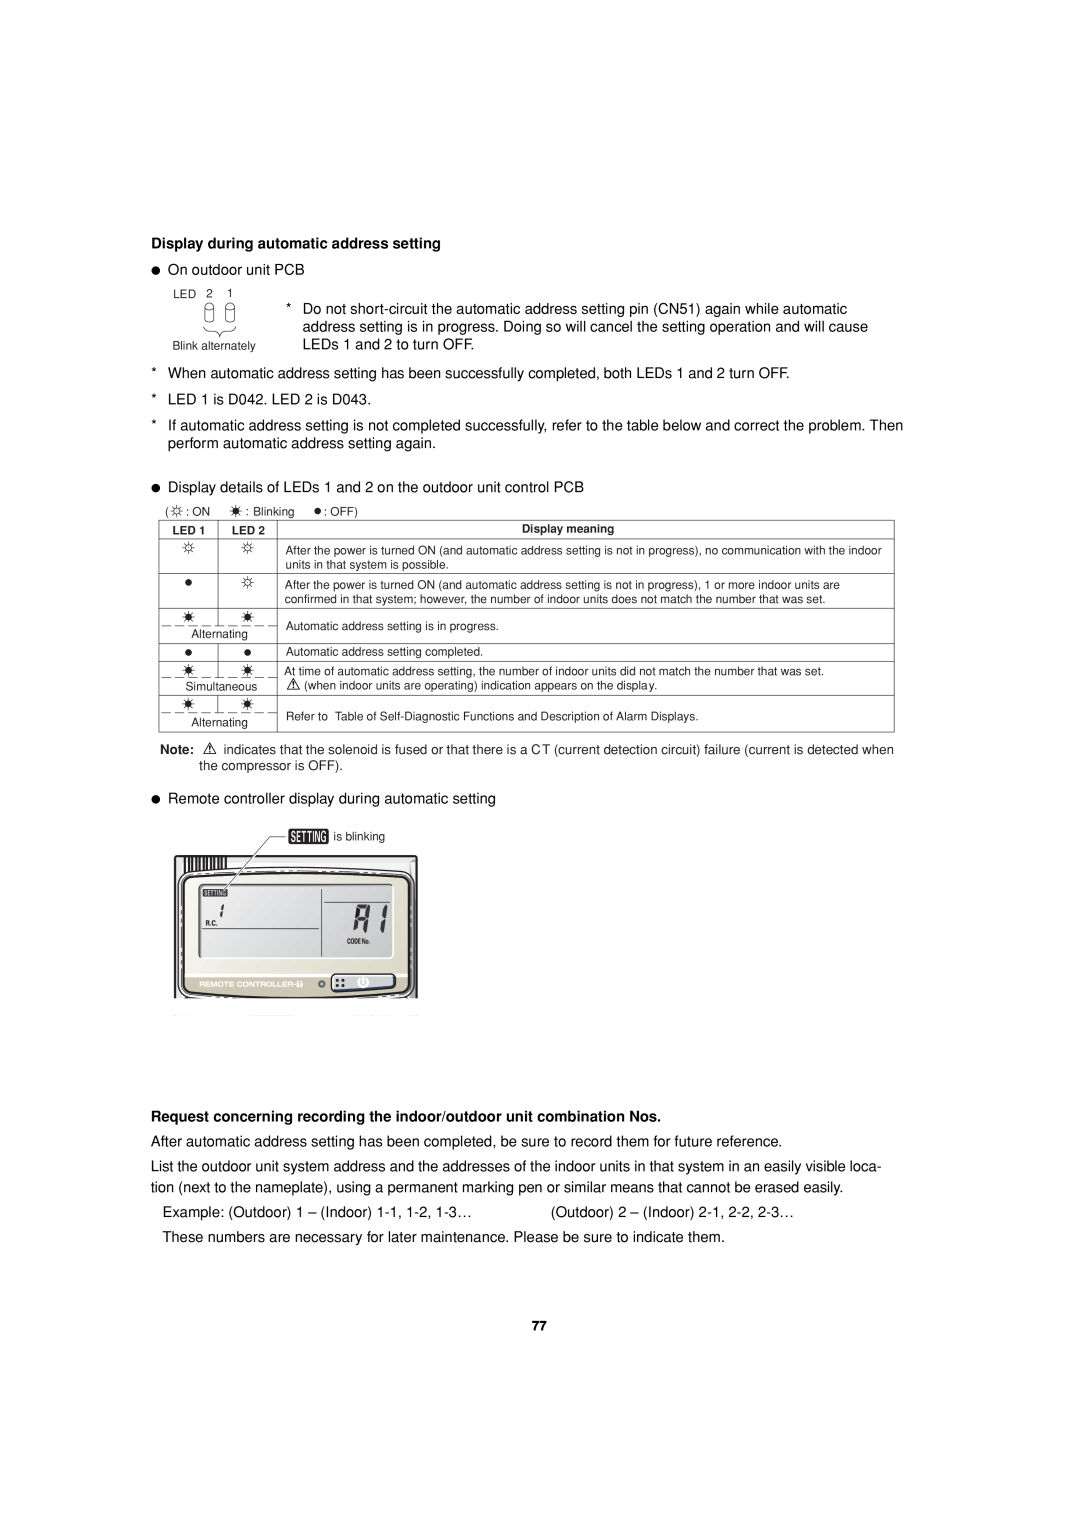 Sanyo 85464359981002 installation instructions Display during automatic address setting 